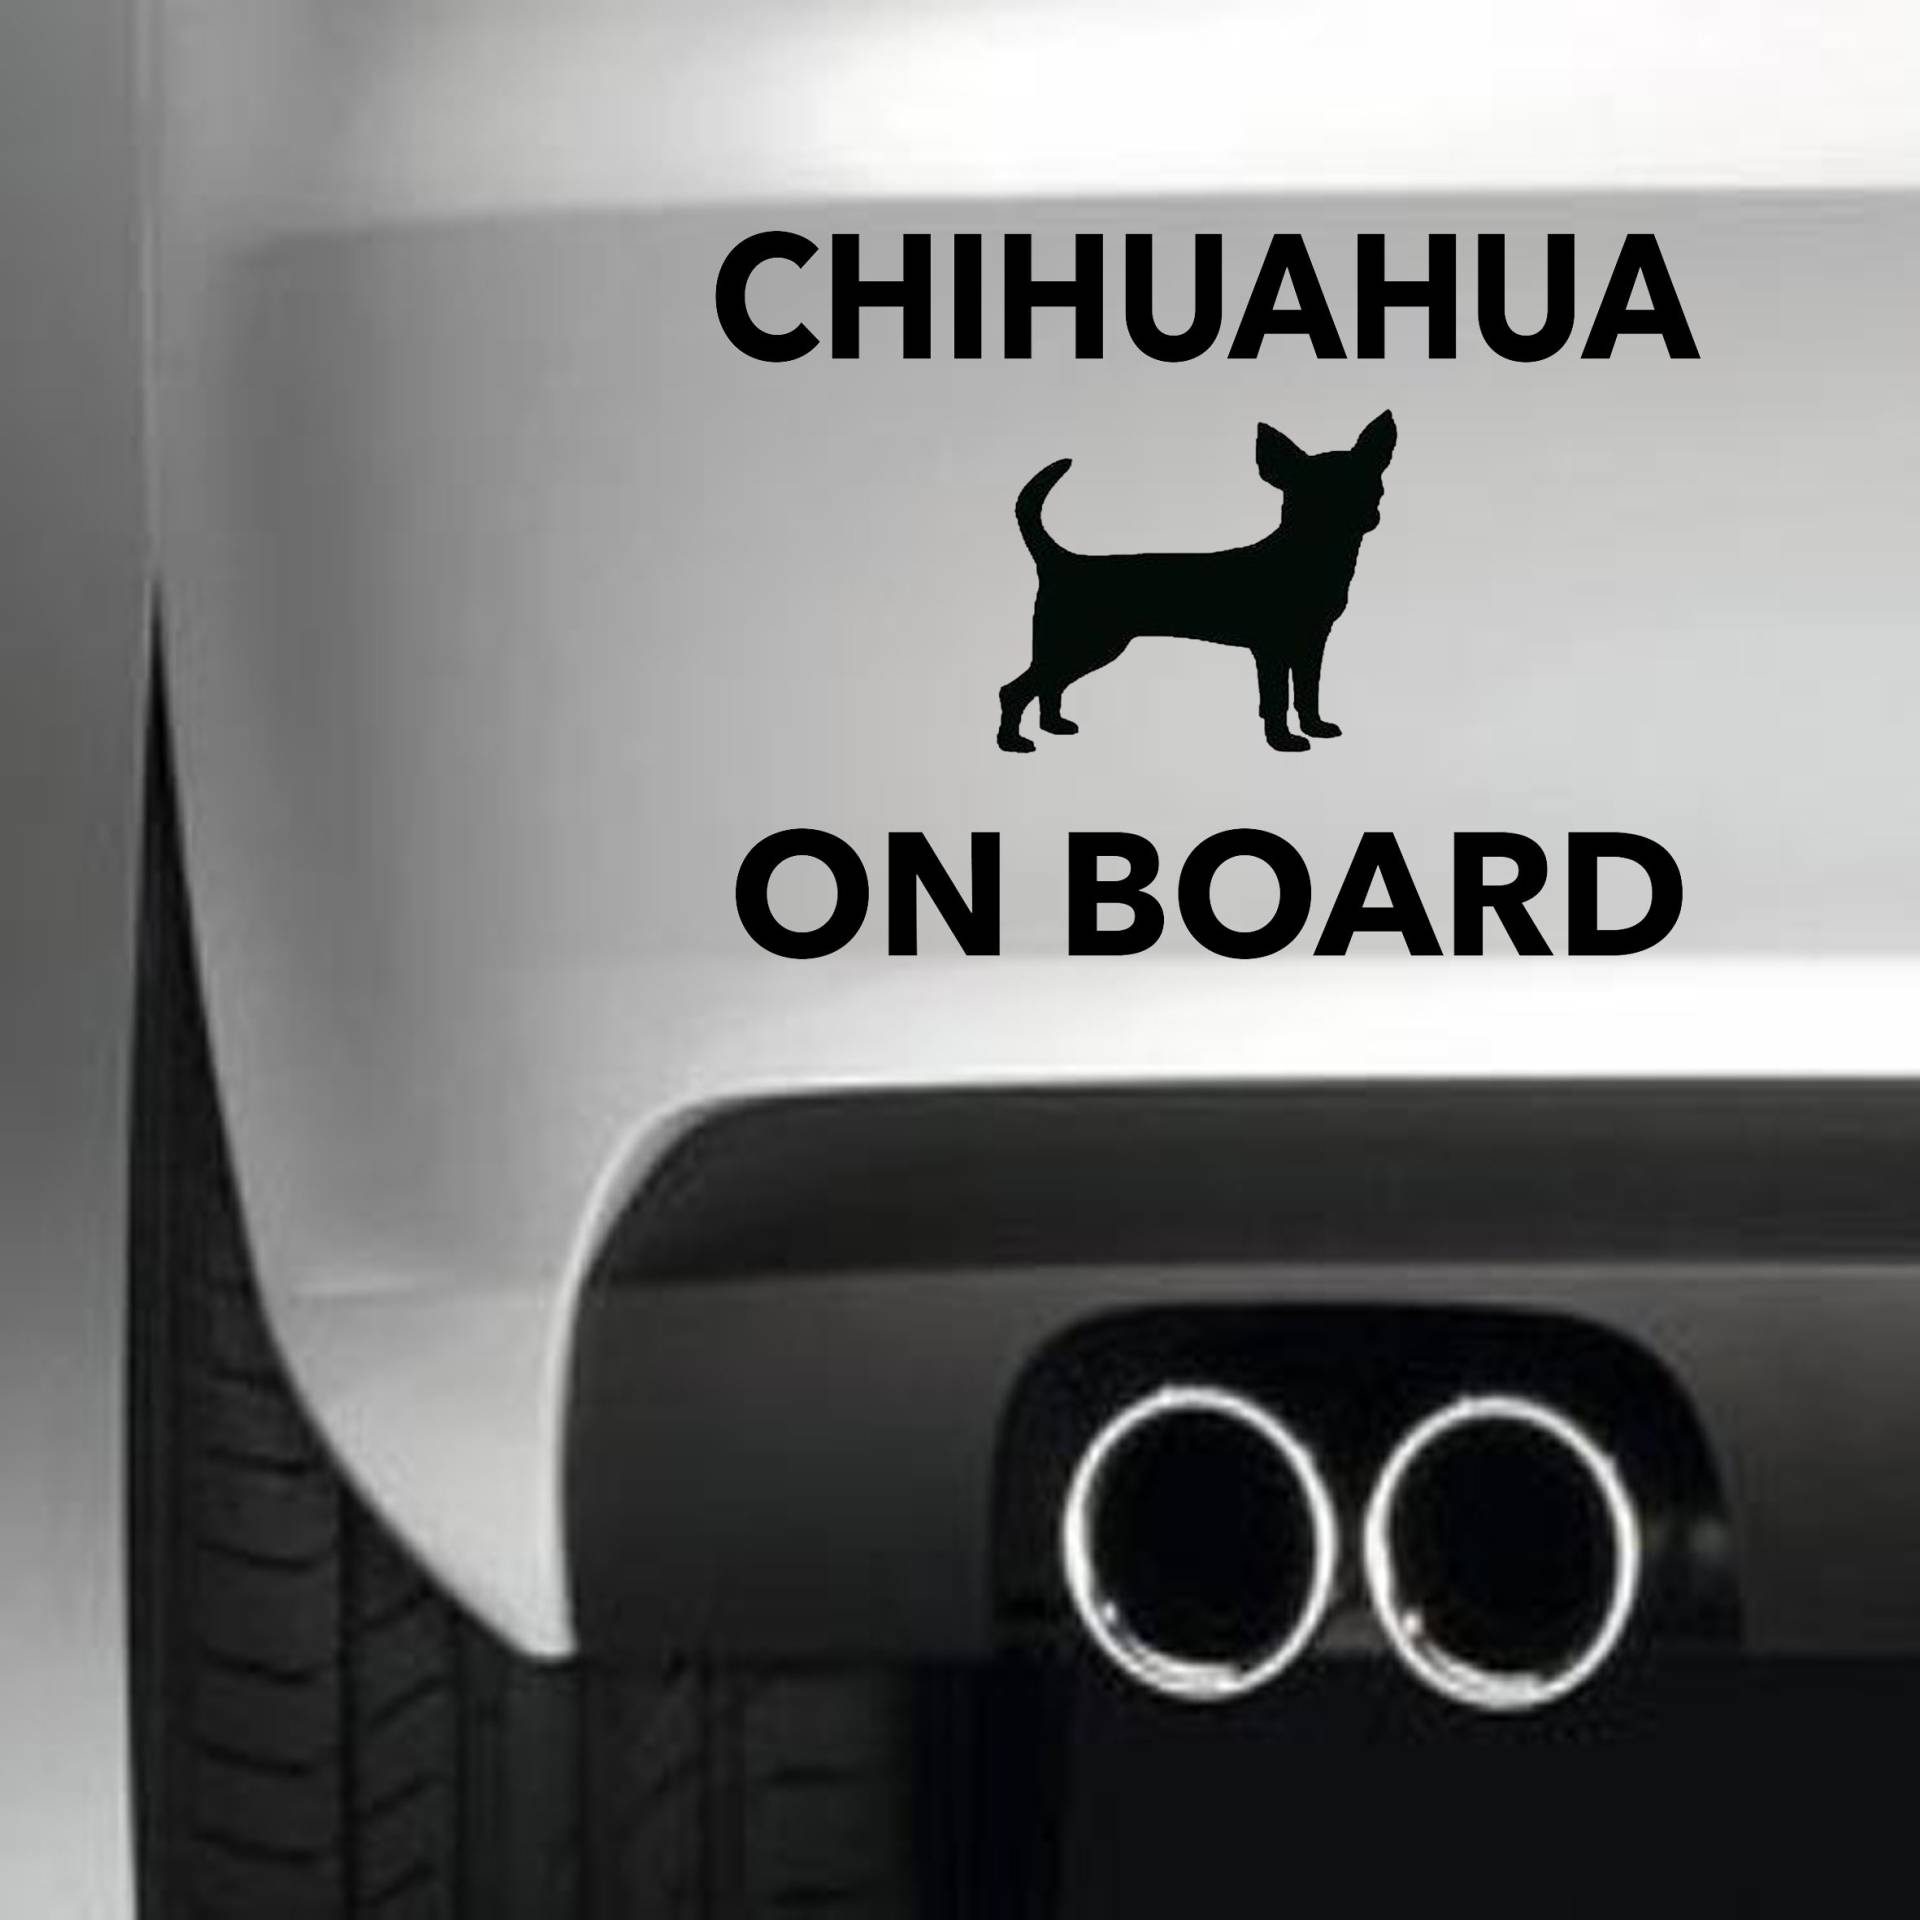 South Coast Stickers Chihuahua On Board Sticker Funny Bumper Sticker CAR Van 4X4 Window PAINTWORK Decal Euro Left Hand Drive von South Coast Stickers